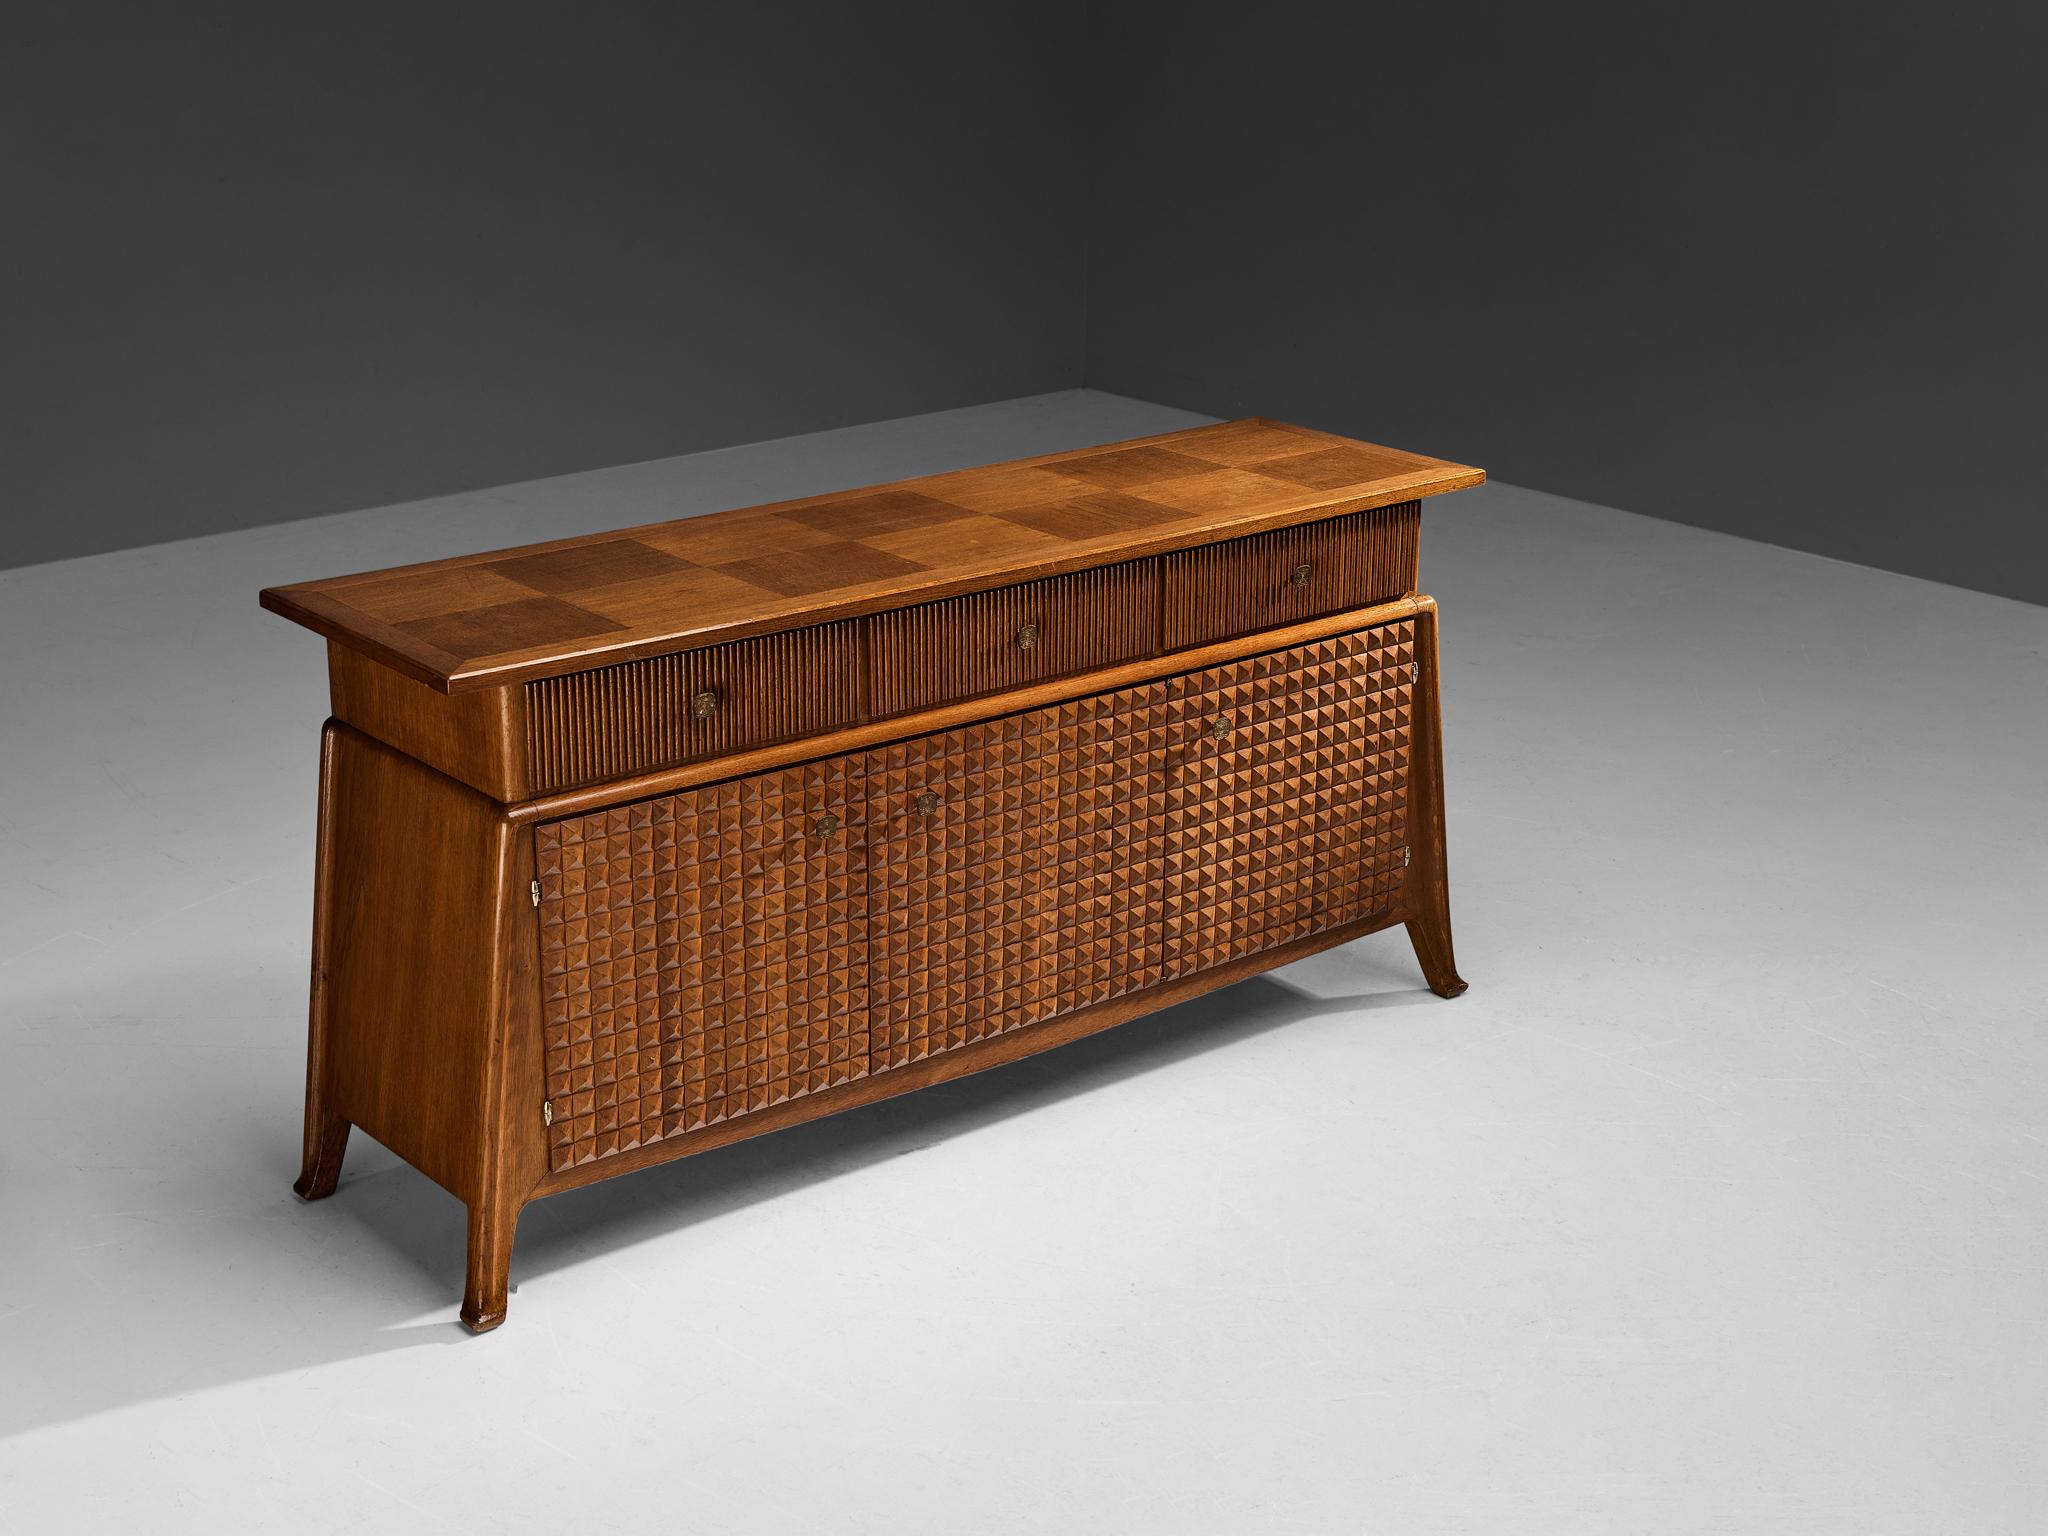 Ernesto Valabrega, sideboard, stained oak, brass, Italy, circa 1935 

This sideboard by Italian designer Ernesto Valabrega is exemplary for refined, highly detailed and very well-made furniture. The lower part of the corpus is based on a trapezoid